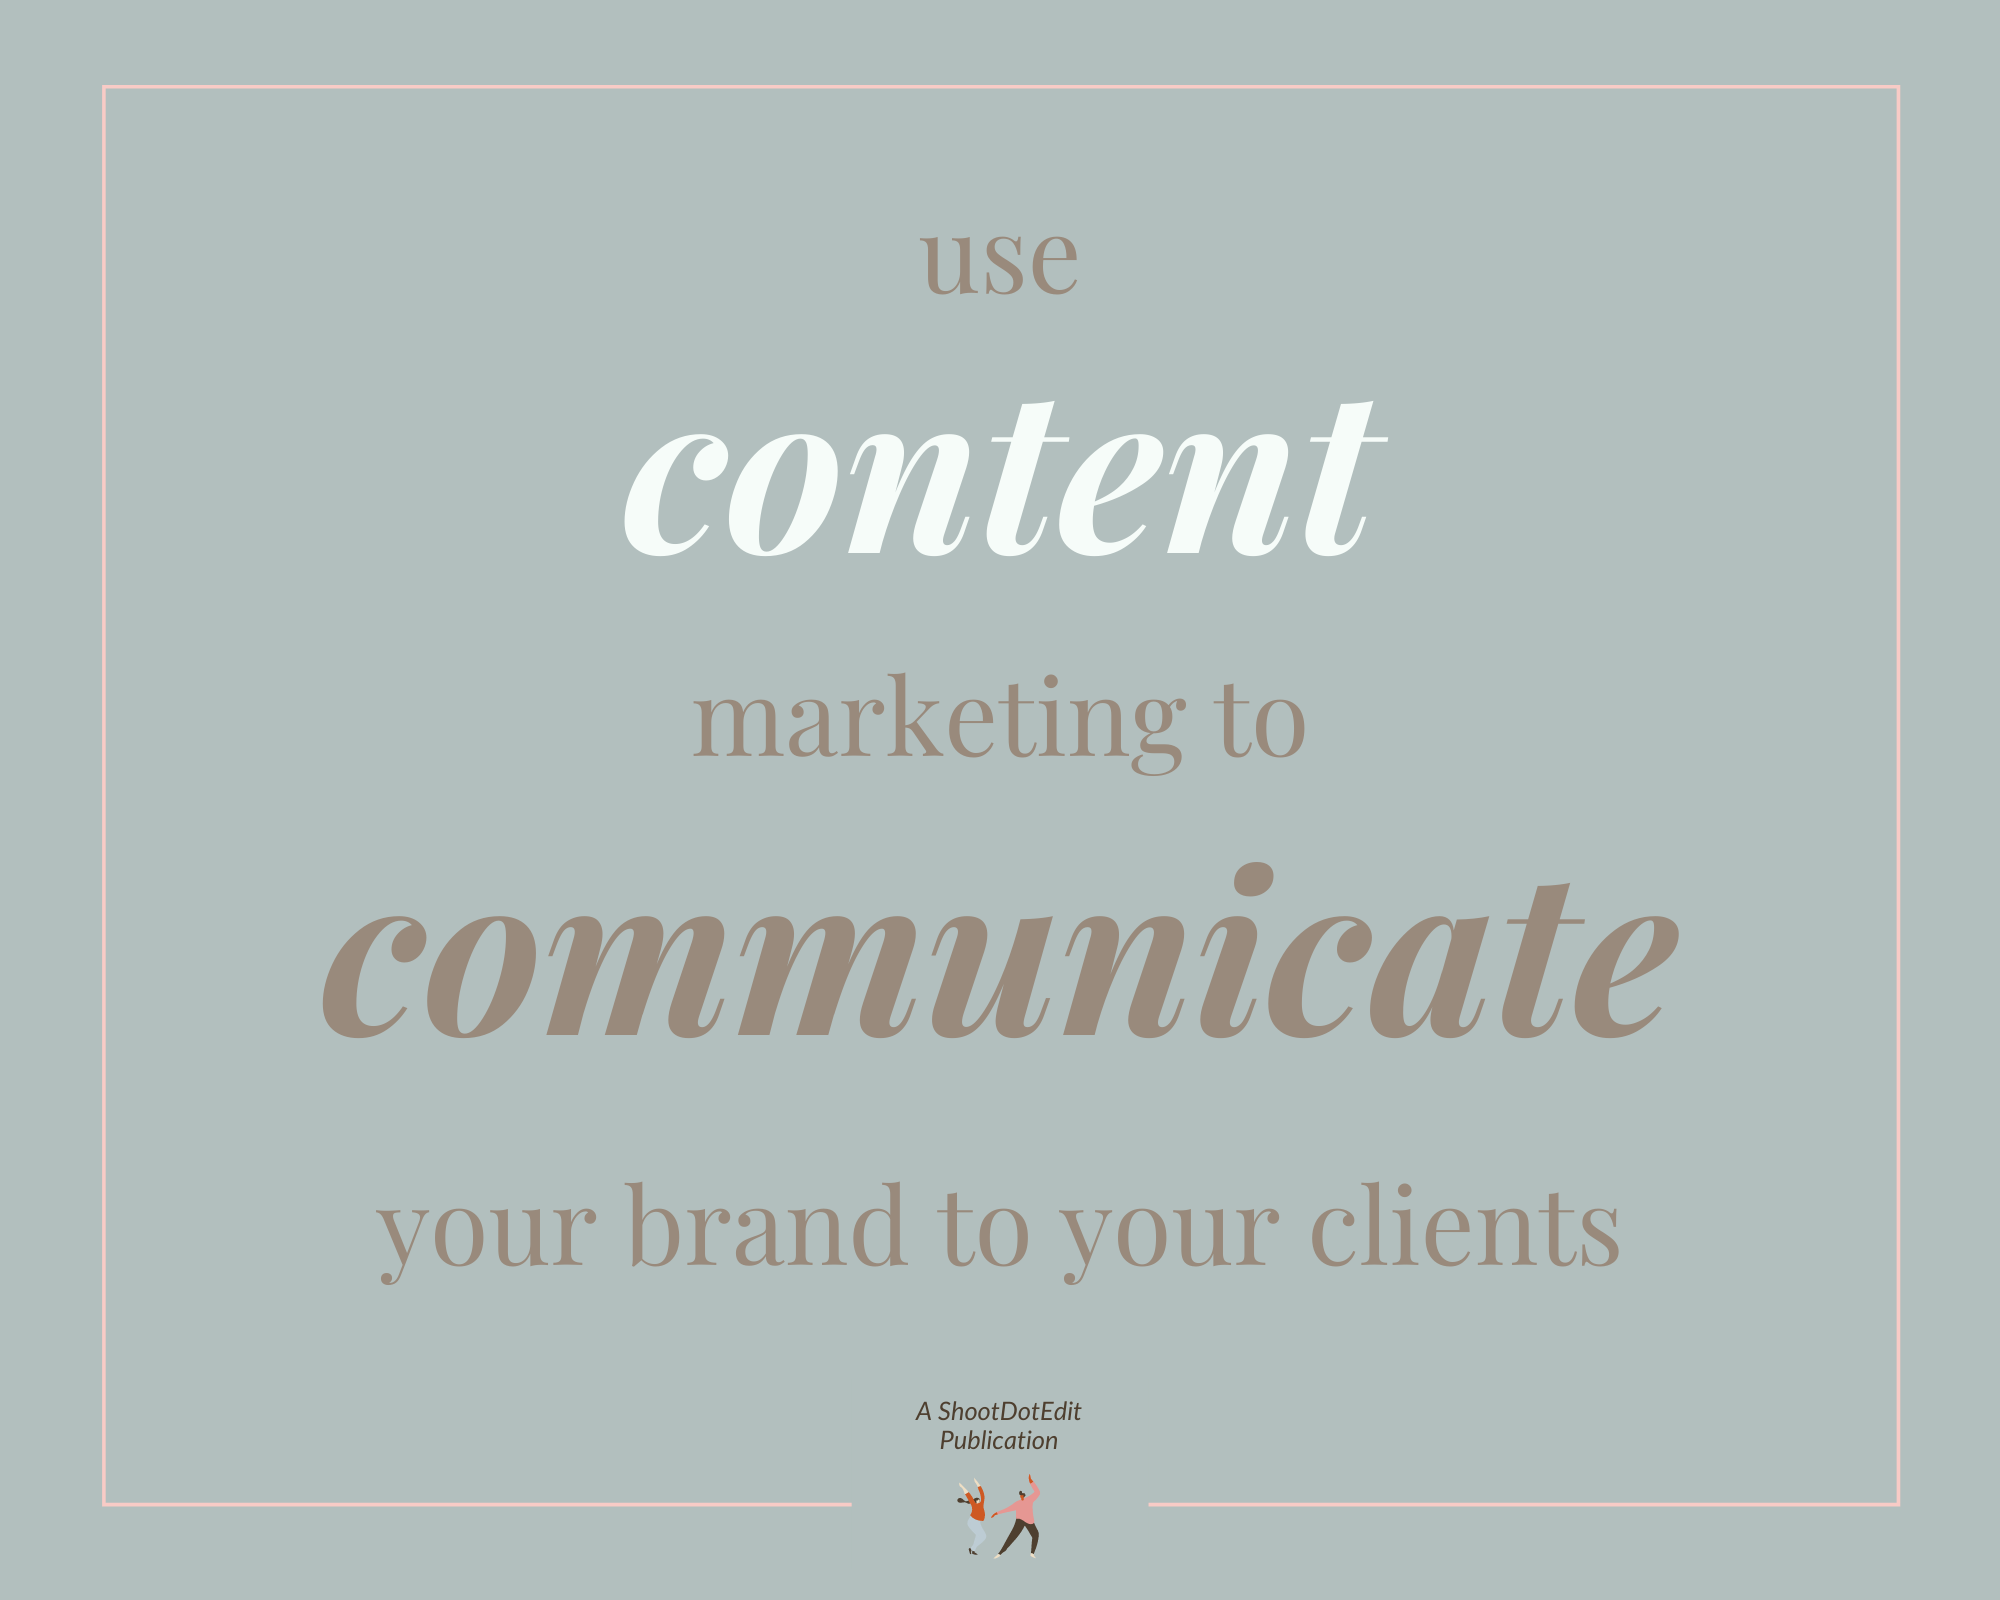 Infographic stating use content marketing to communicate your brand to your clients